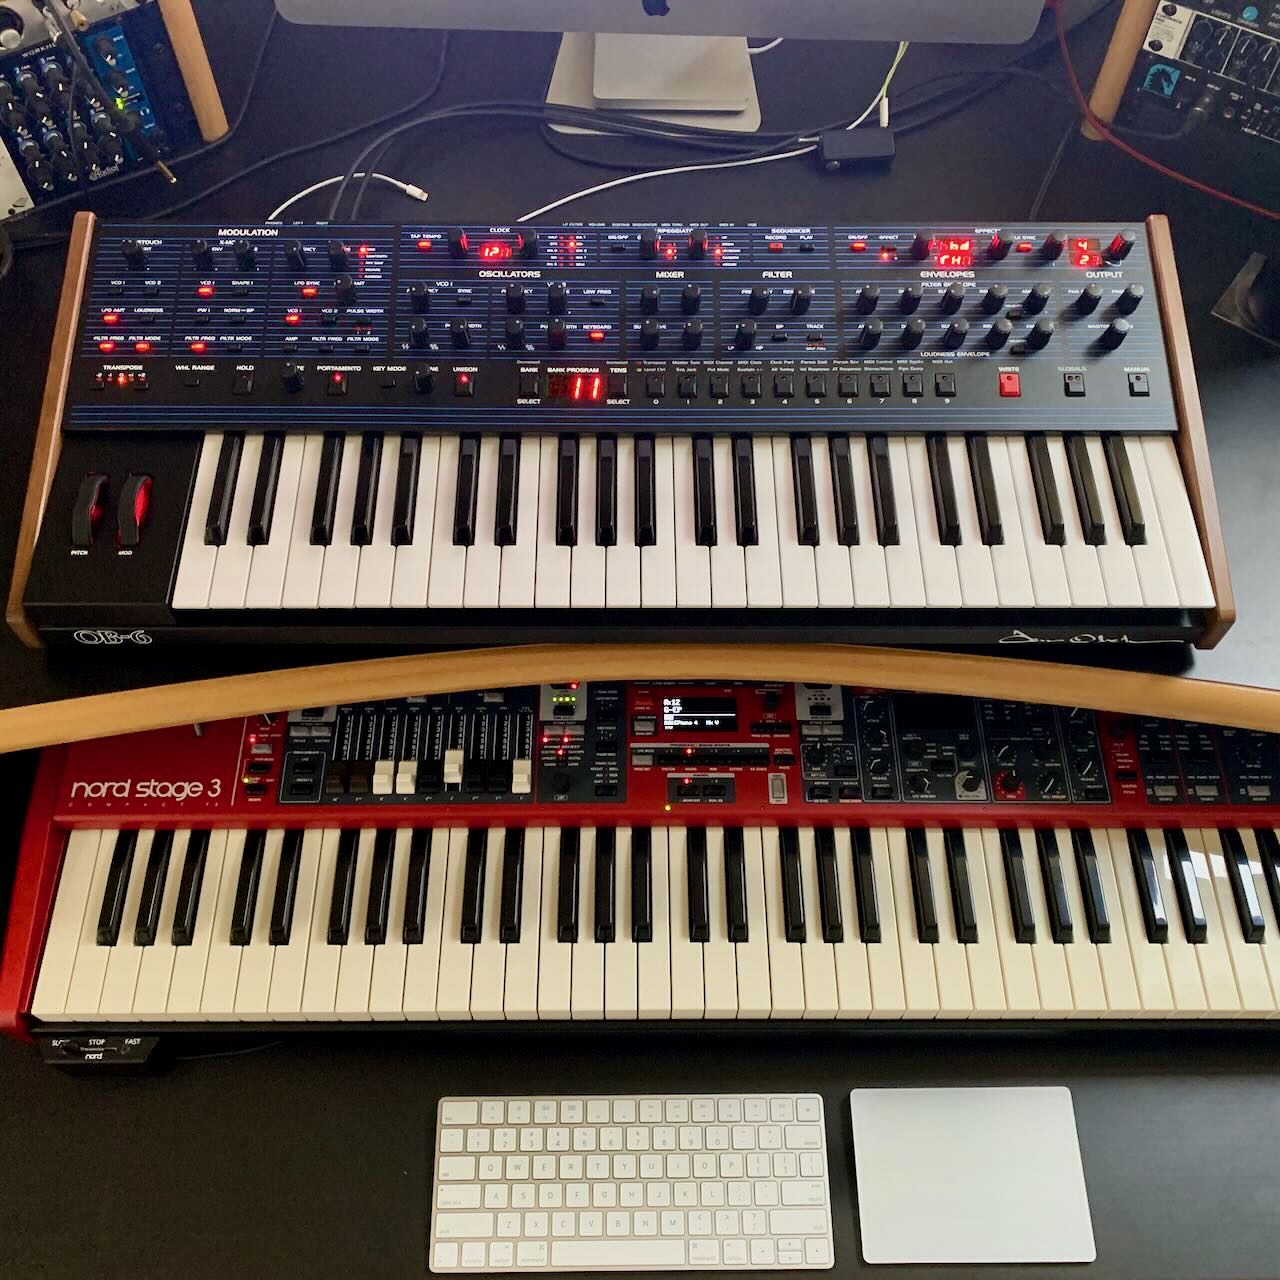 OB-6 and Nord Stage 3